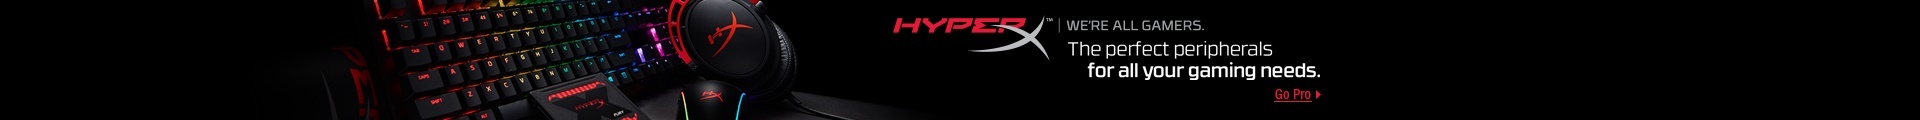 HYPERX The perfect peripherals for all your gaming needs